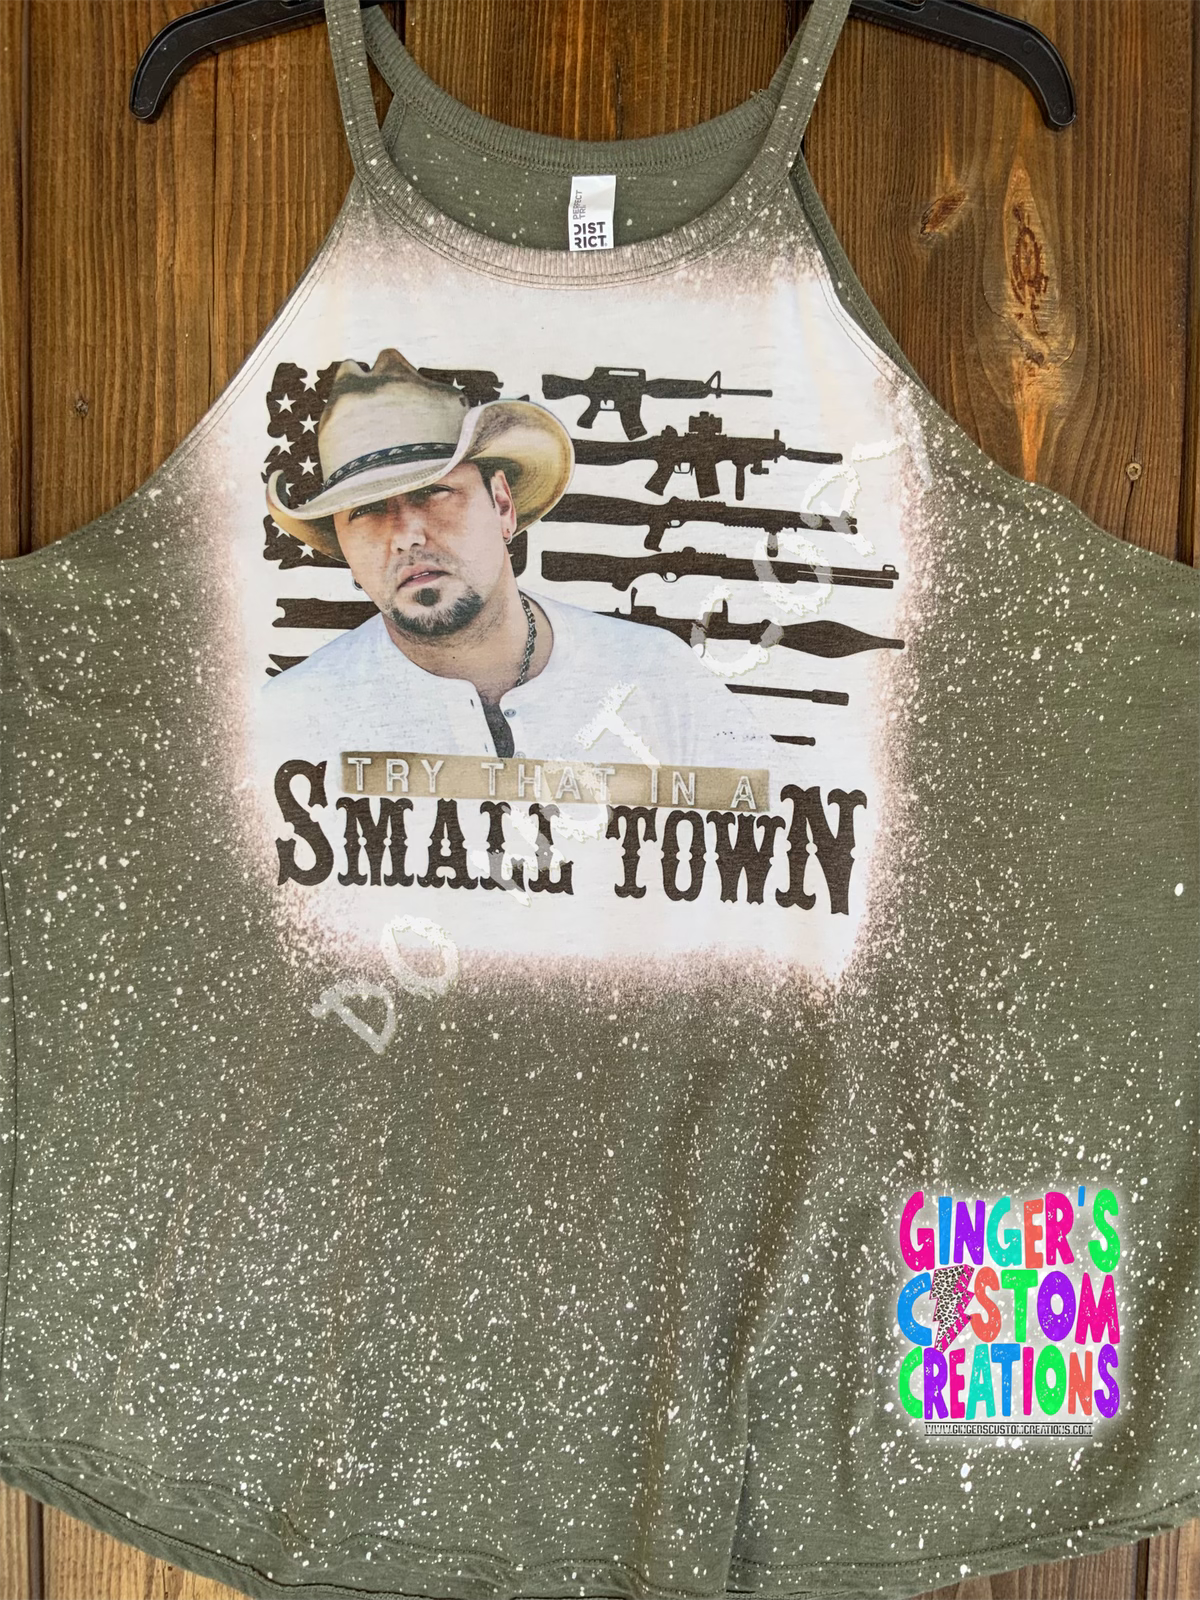 TRY THAT IN A SMALL TOWN STARS DESIGN - NAVY ROCKER TANK TOP